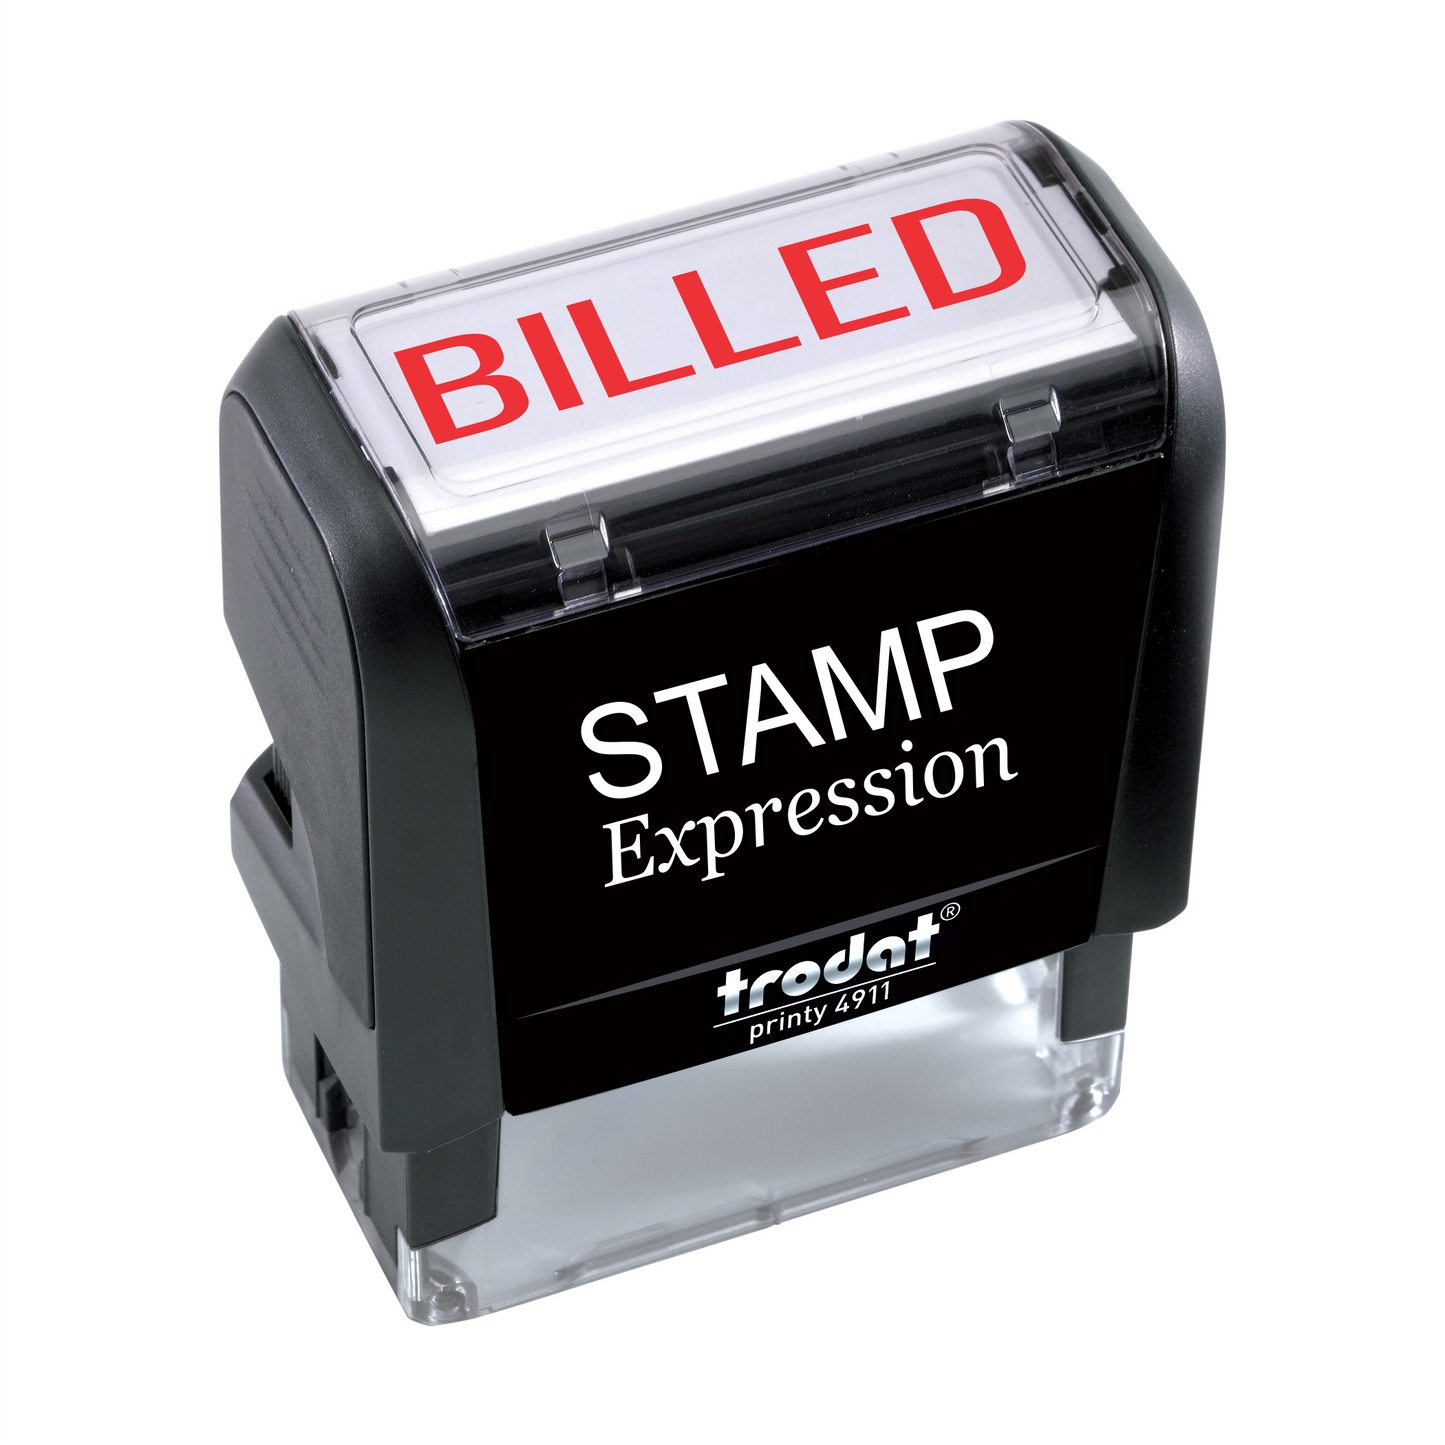 Capitalized Billed Office Self Inking Rubber Stamp (SH-5233)